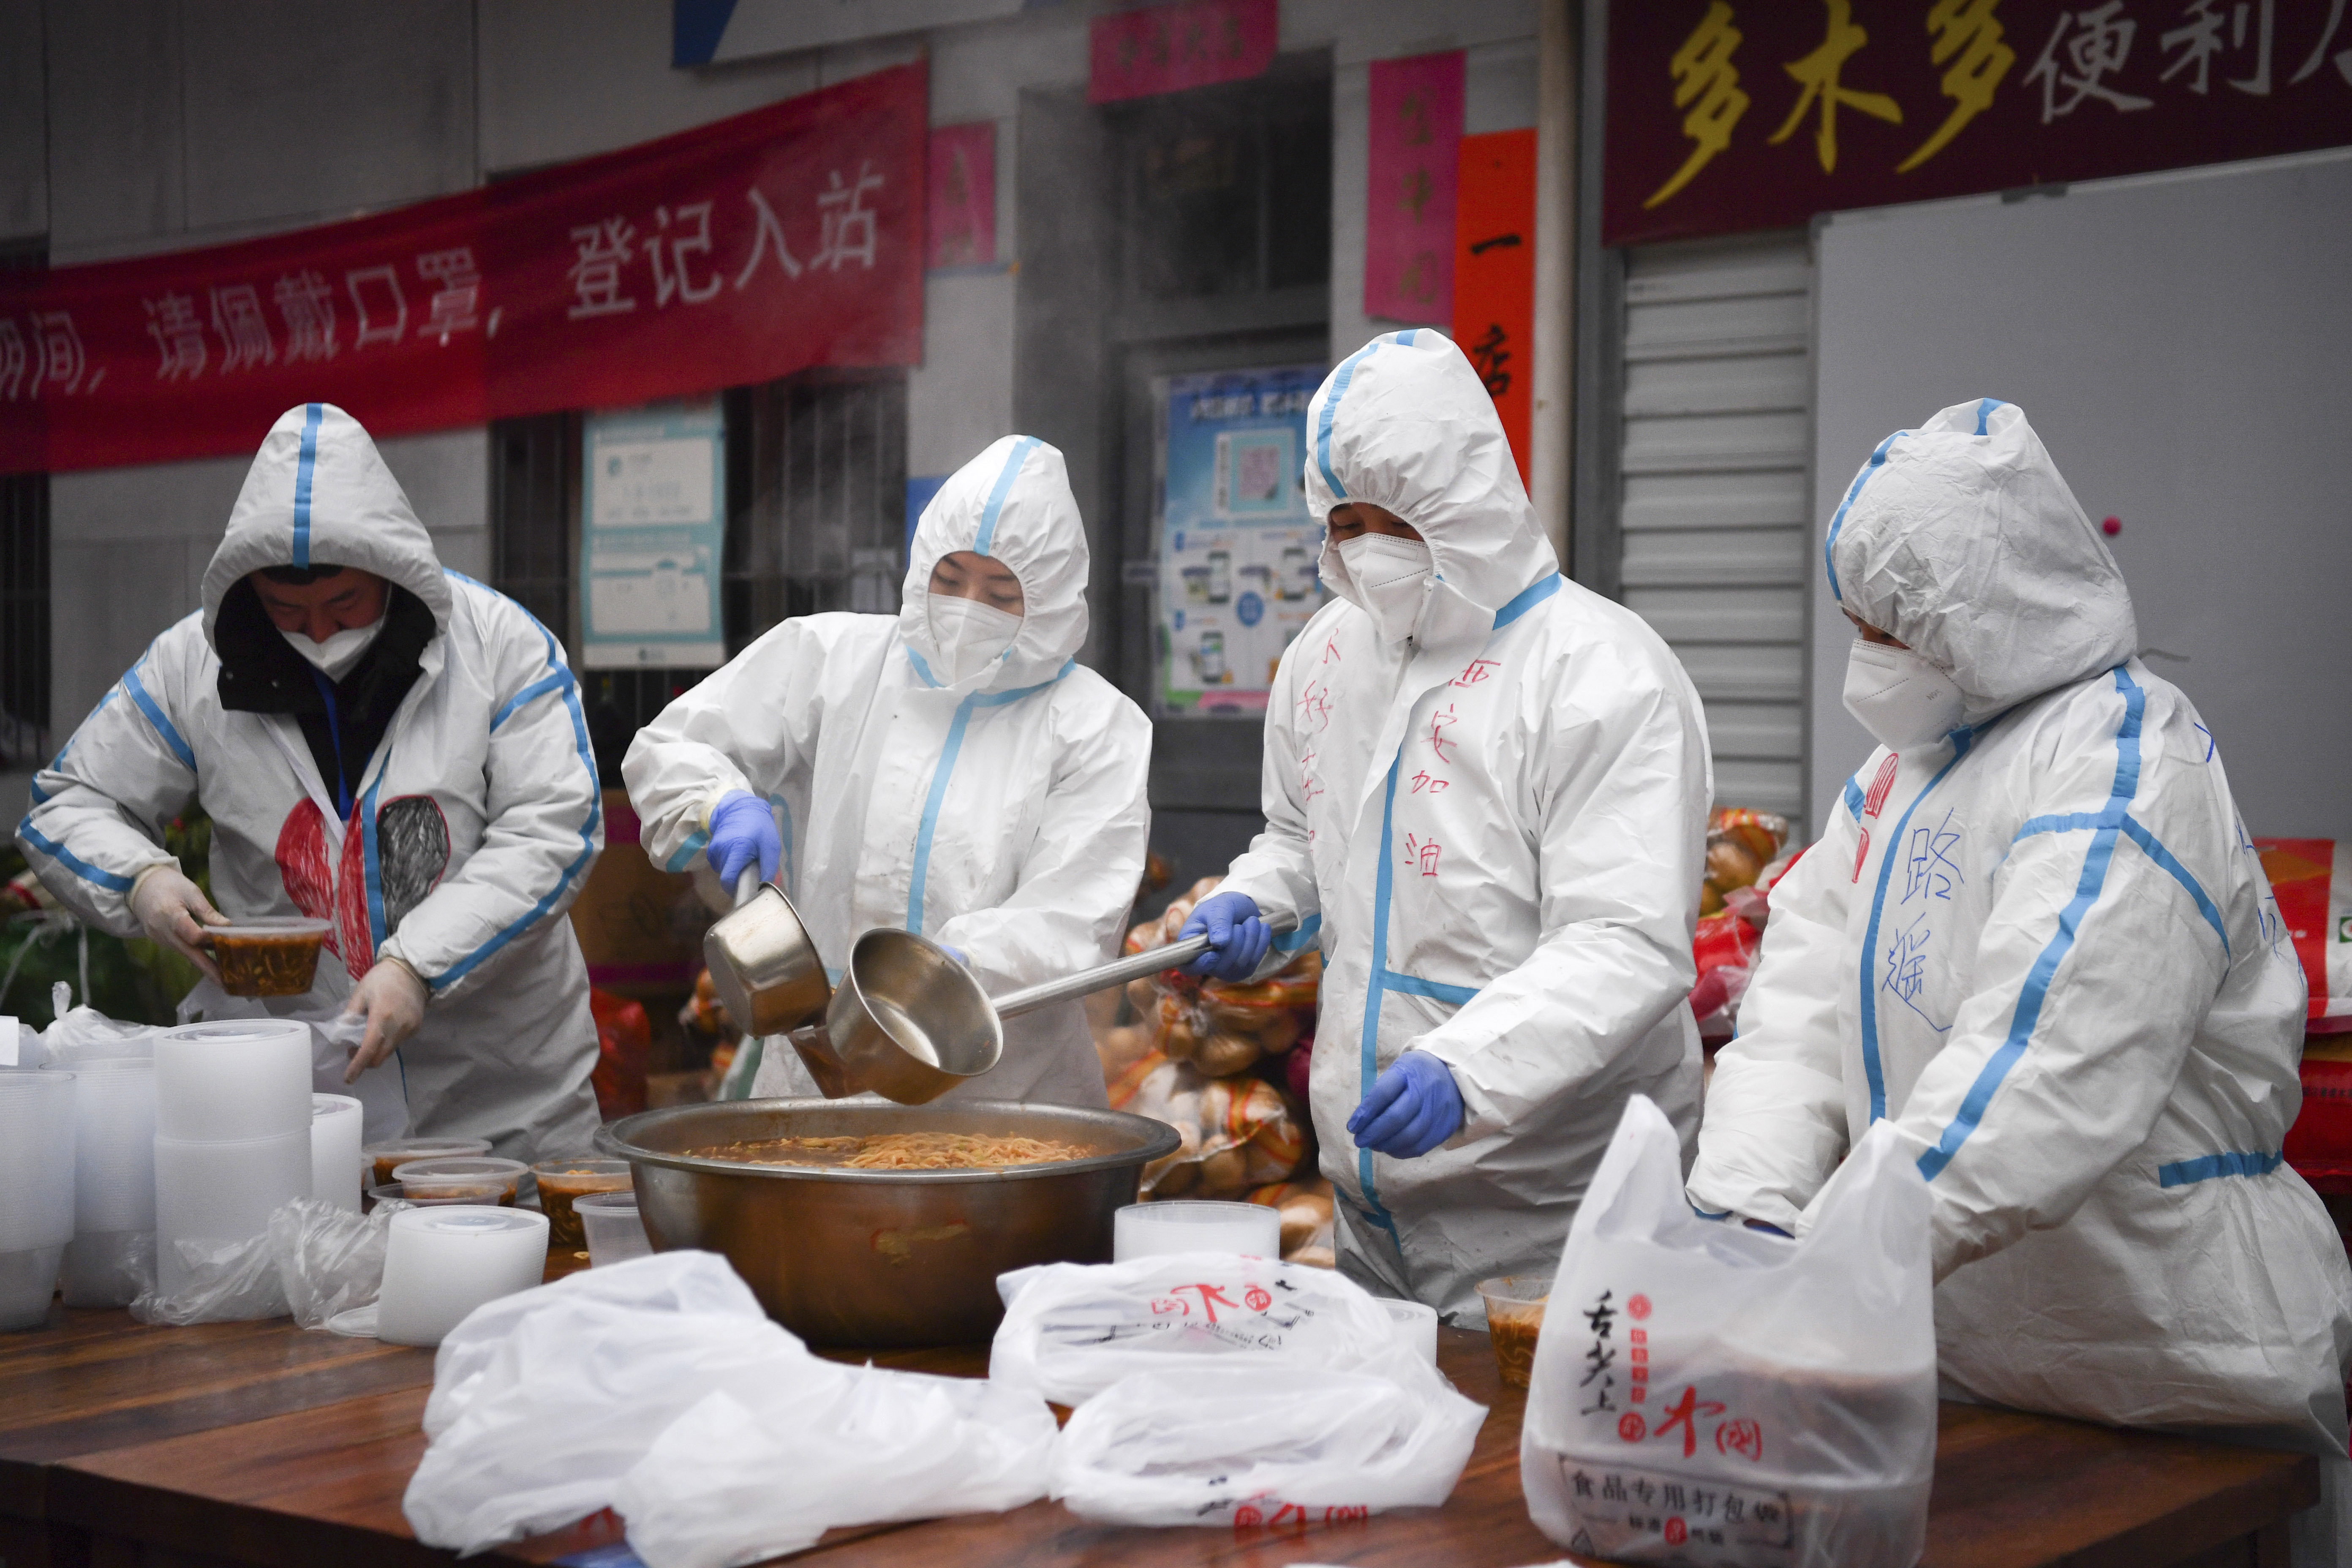 In this photo released by China's Xinhua News Agency, volunteers wearing protective suits package meals for delivery to people under lockdown in Xi'an in northwestern China's Shaanxi Province, Tuesday, January. 4, 2022. Hospital officials in the northern Chinese city of Xi'an have been punished after a pregnant woman miscarried after being refused entry, reportedly for not having current COVID-19 test results. 